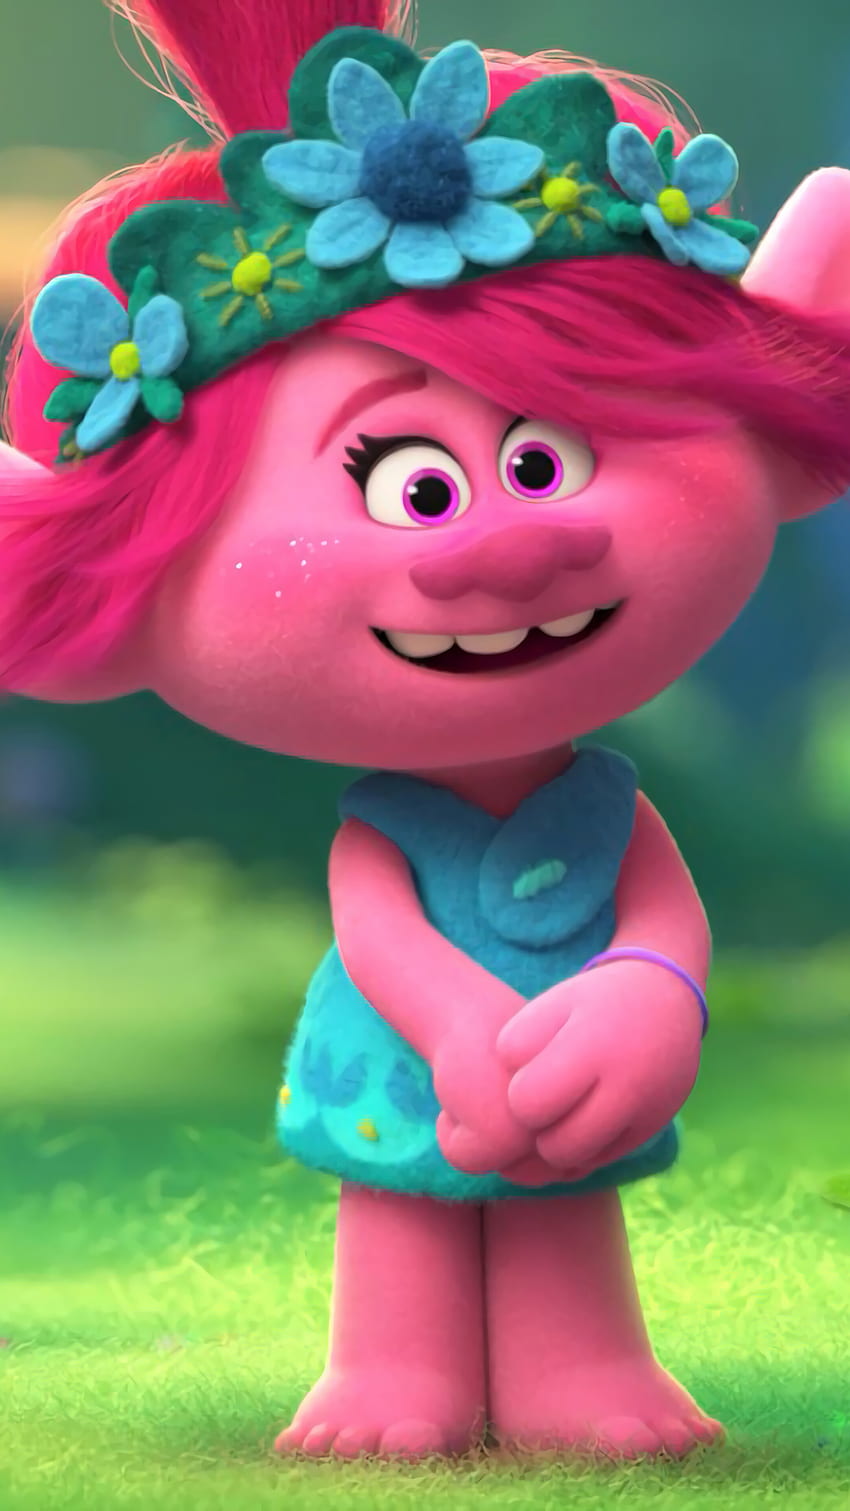 Download Trolls wallpapers for mobile phone free Trolls HD pictures